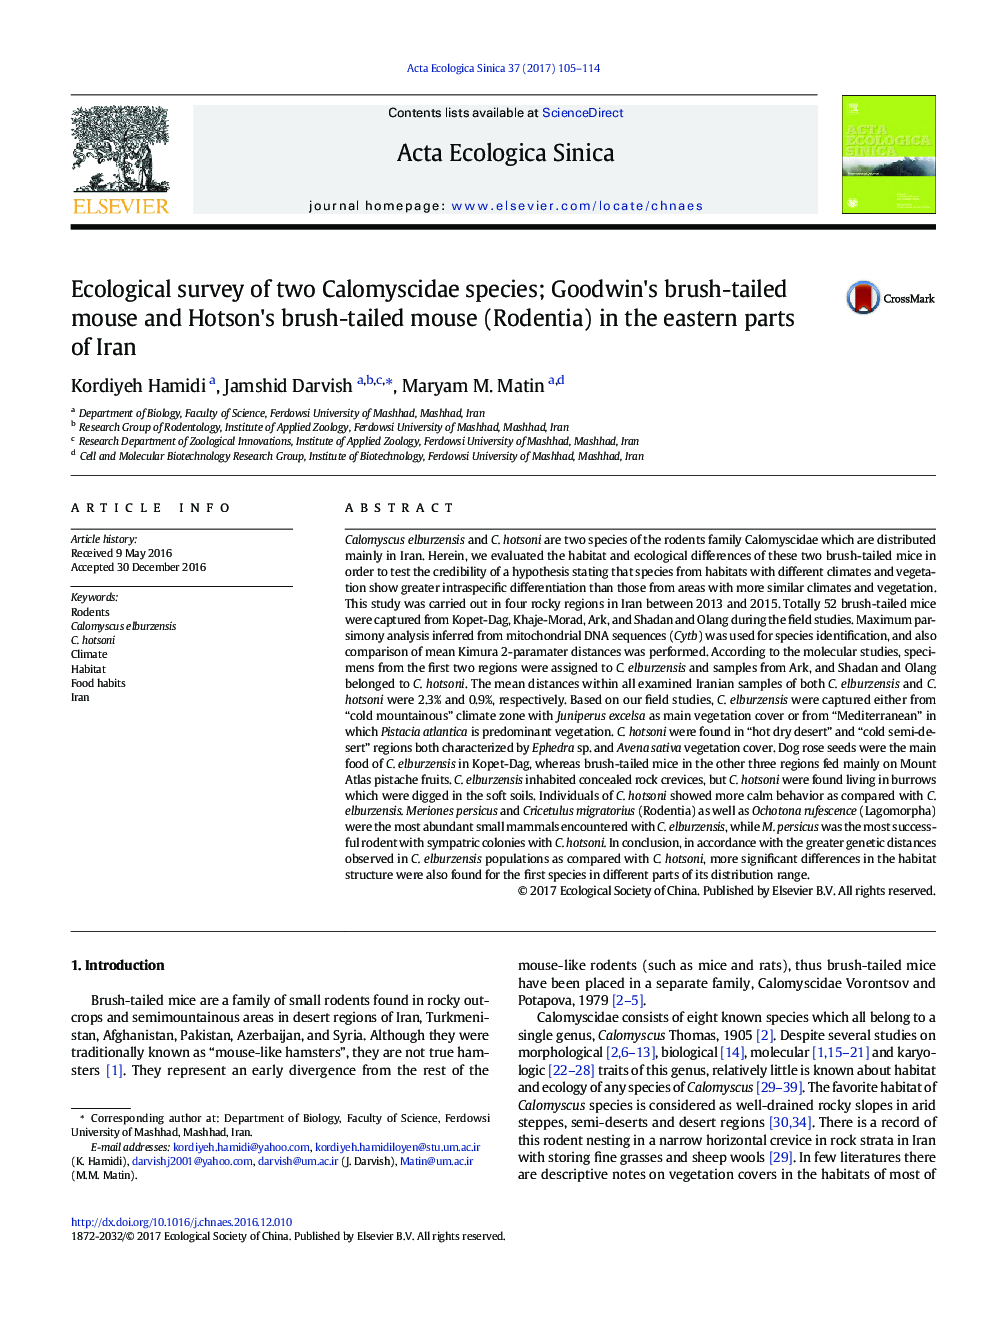 Ecological survey of two Calomyscidae species; Goodwin's brush-tailed mouse and Hotson's brush-tailed mouse (Rodentia) in the eastern parts of Iran